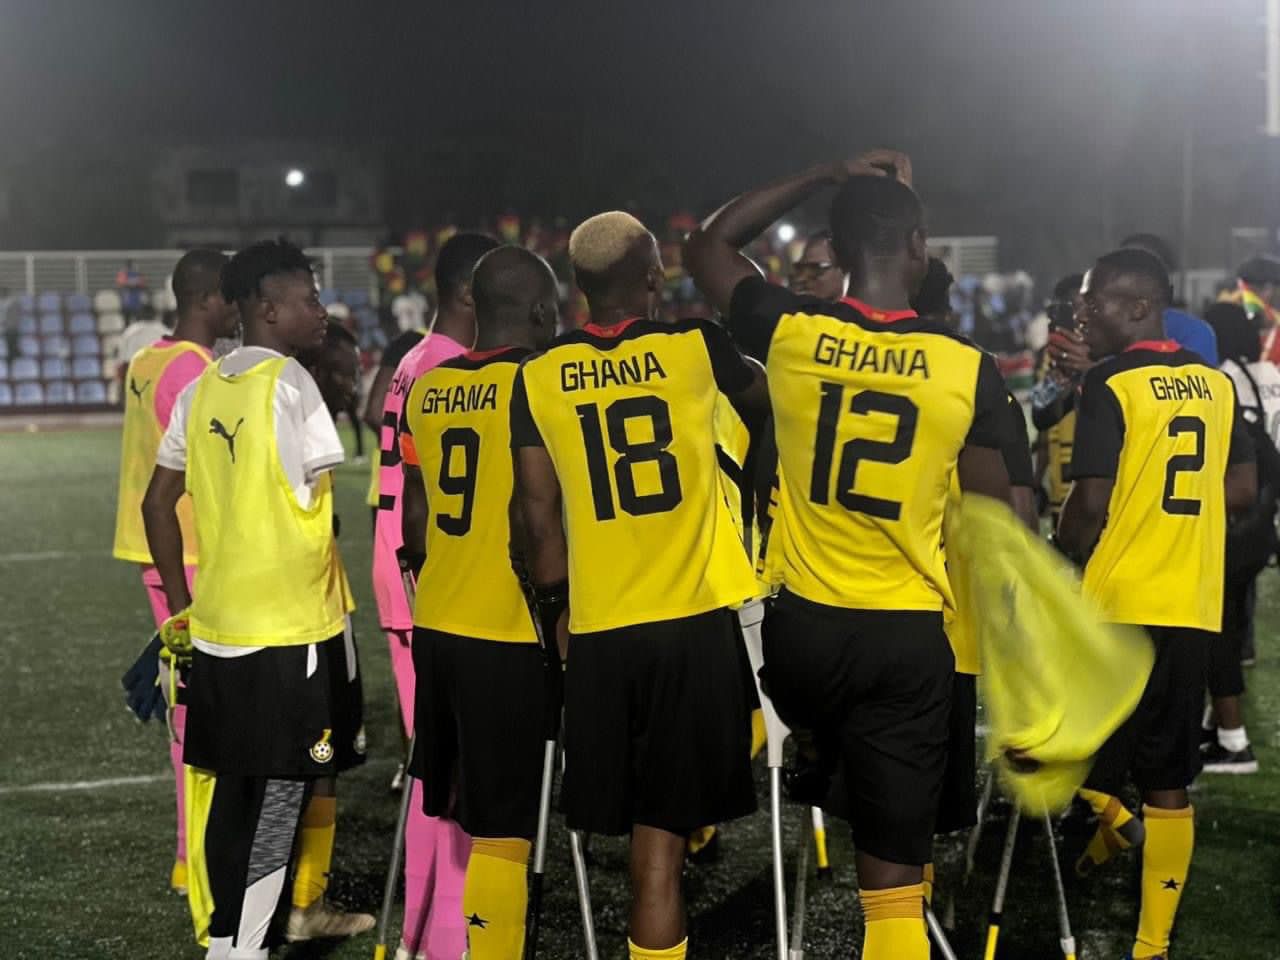 2023 Para Games: A roaring success for Ghana’s Black Challenge as they beat Egypt to make final